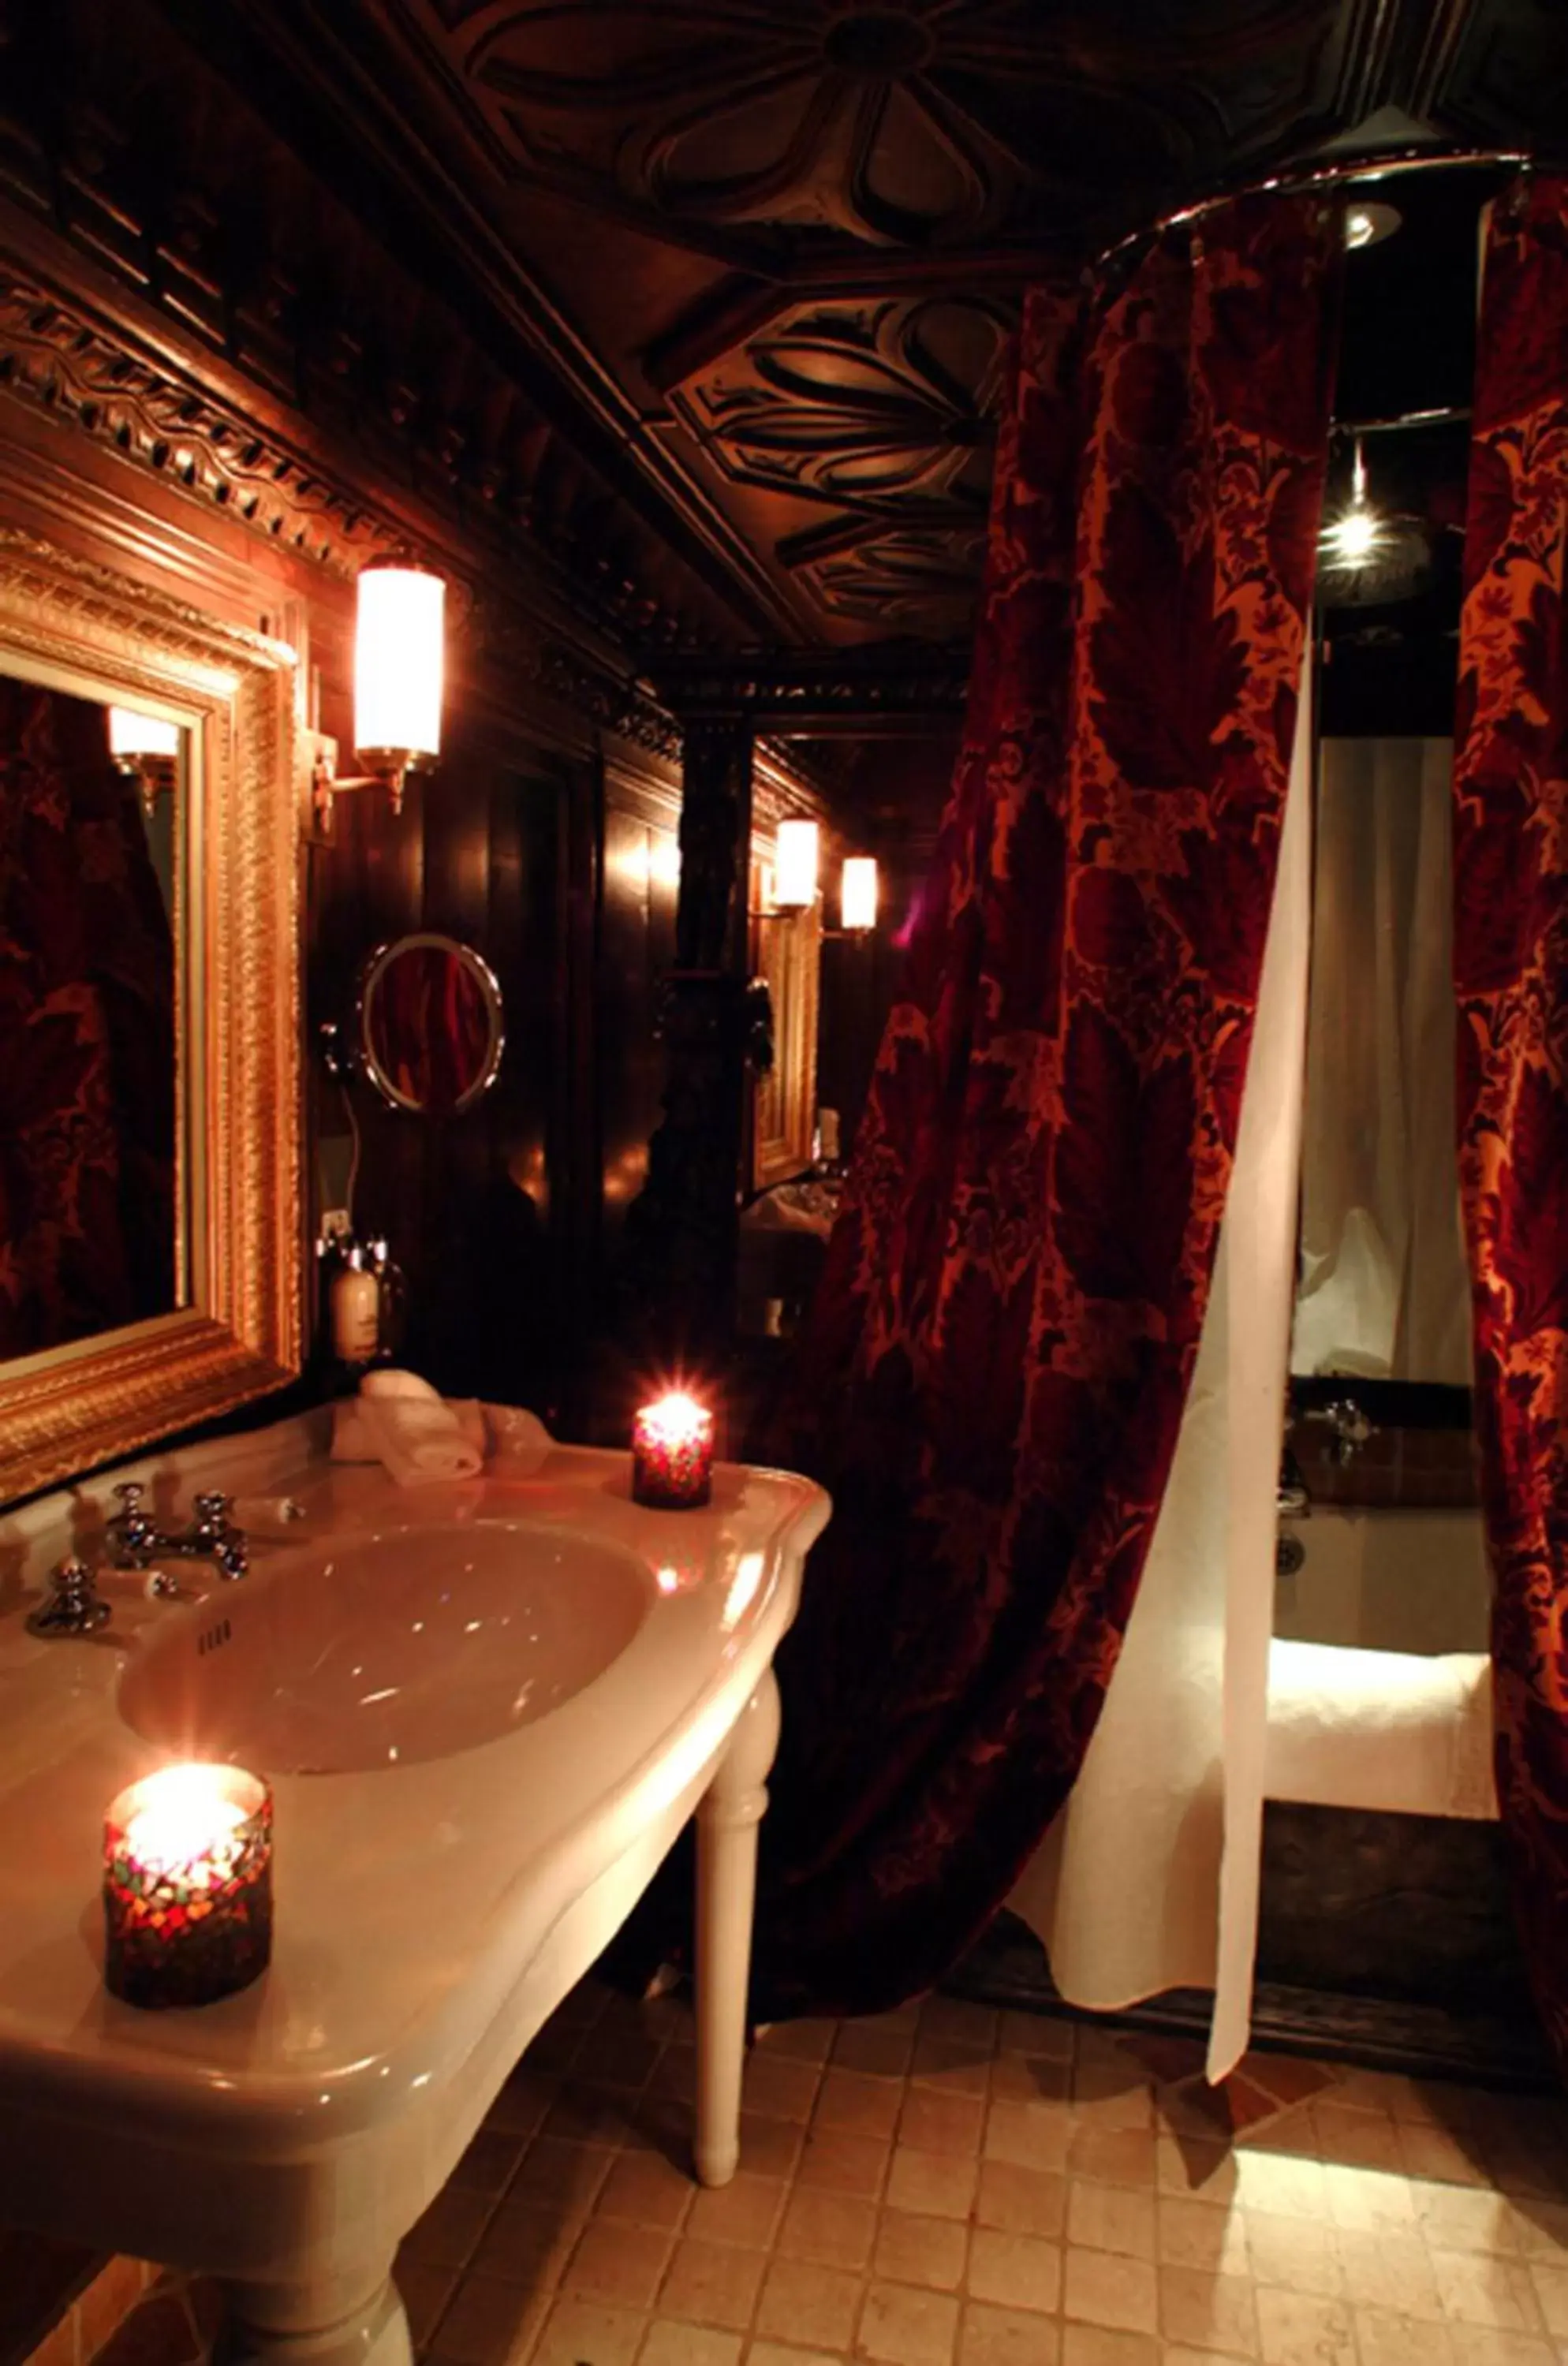 Bathroom in The Witchery by the Castle